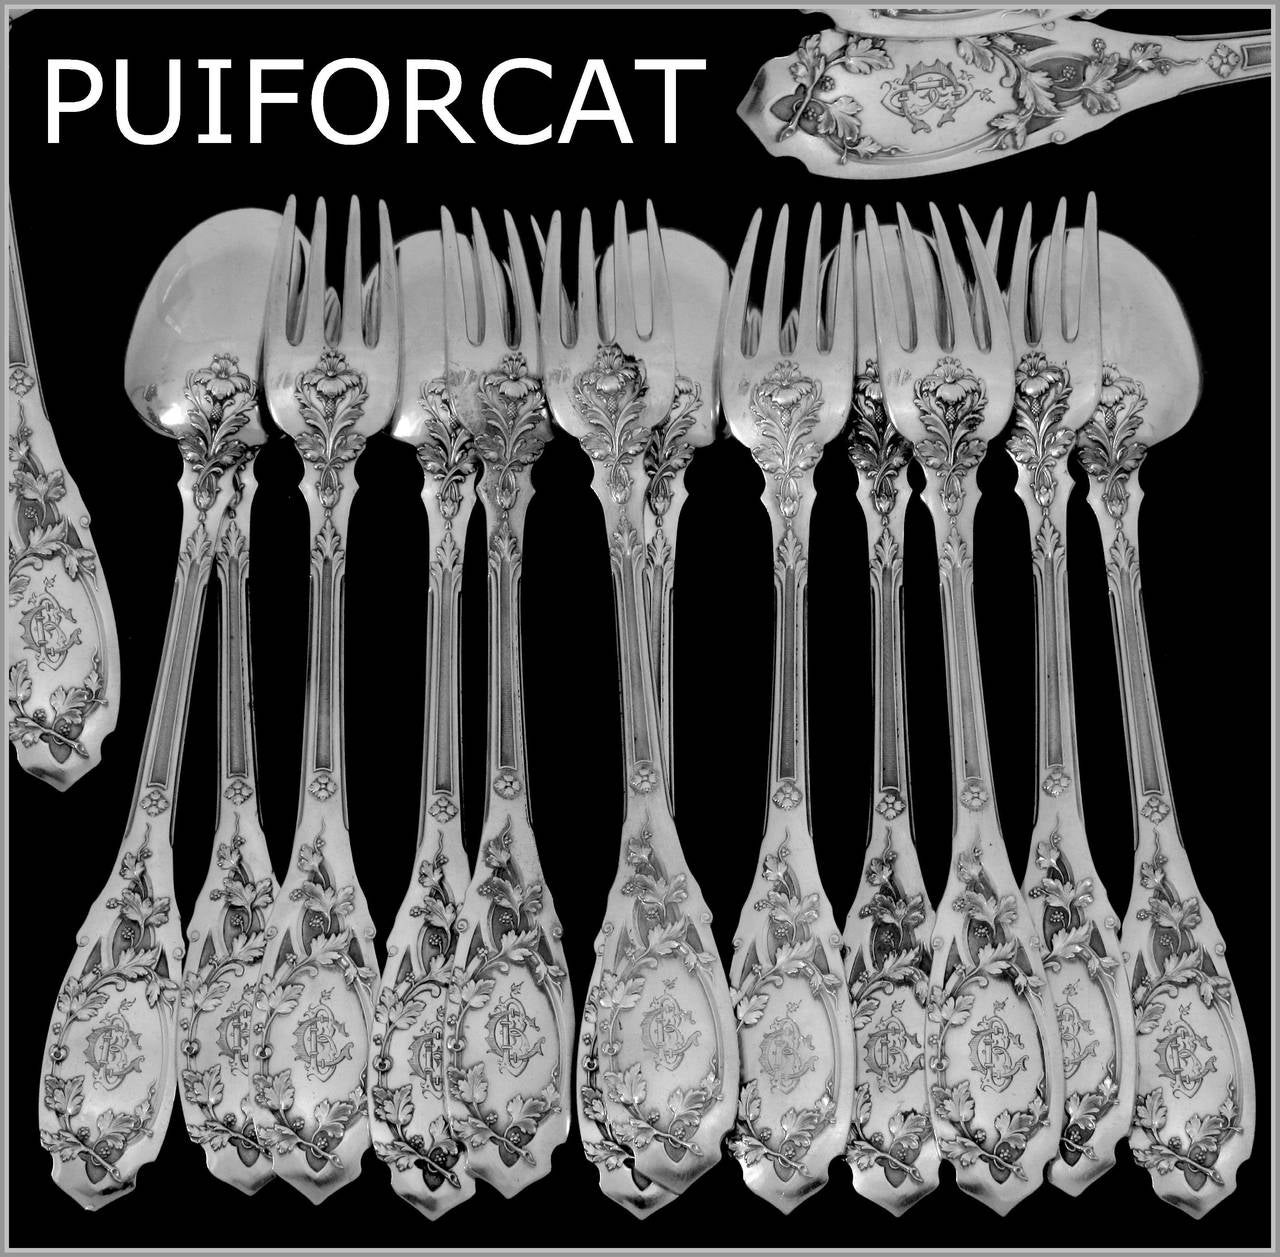 PUIFORCAT Rare French Sterling Silver Dinner Flatware Set 12 pc Moderne Model

Head of Minerve 1 st titre for 950/1000 French Sterling Silver guarantee

The design and workmanship of this set is exceptional. Absolutely gorgeous flatware,